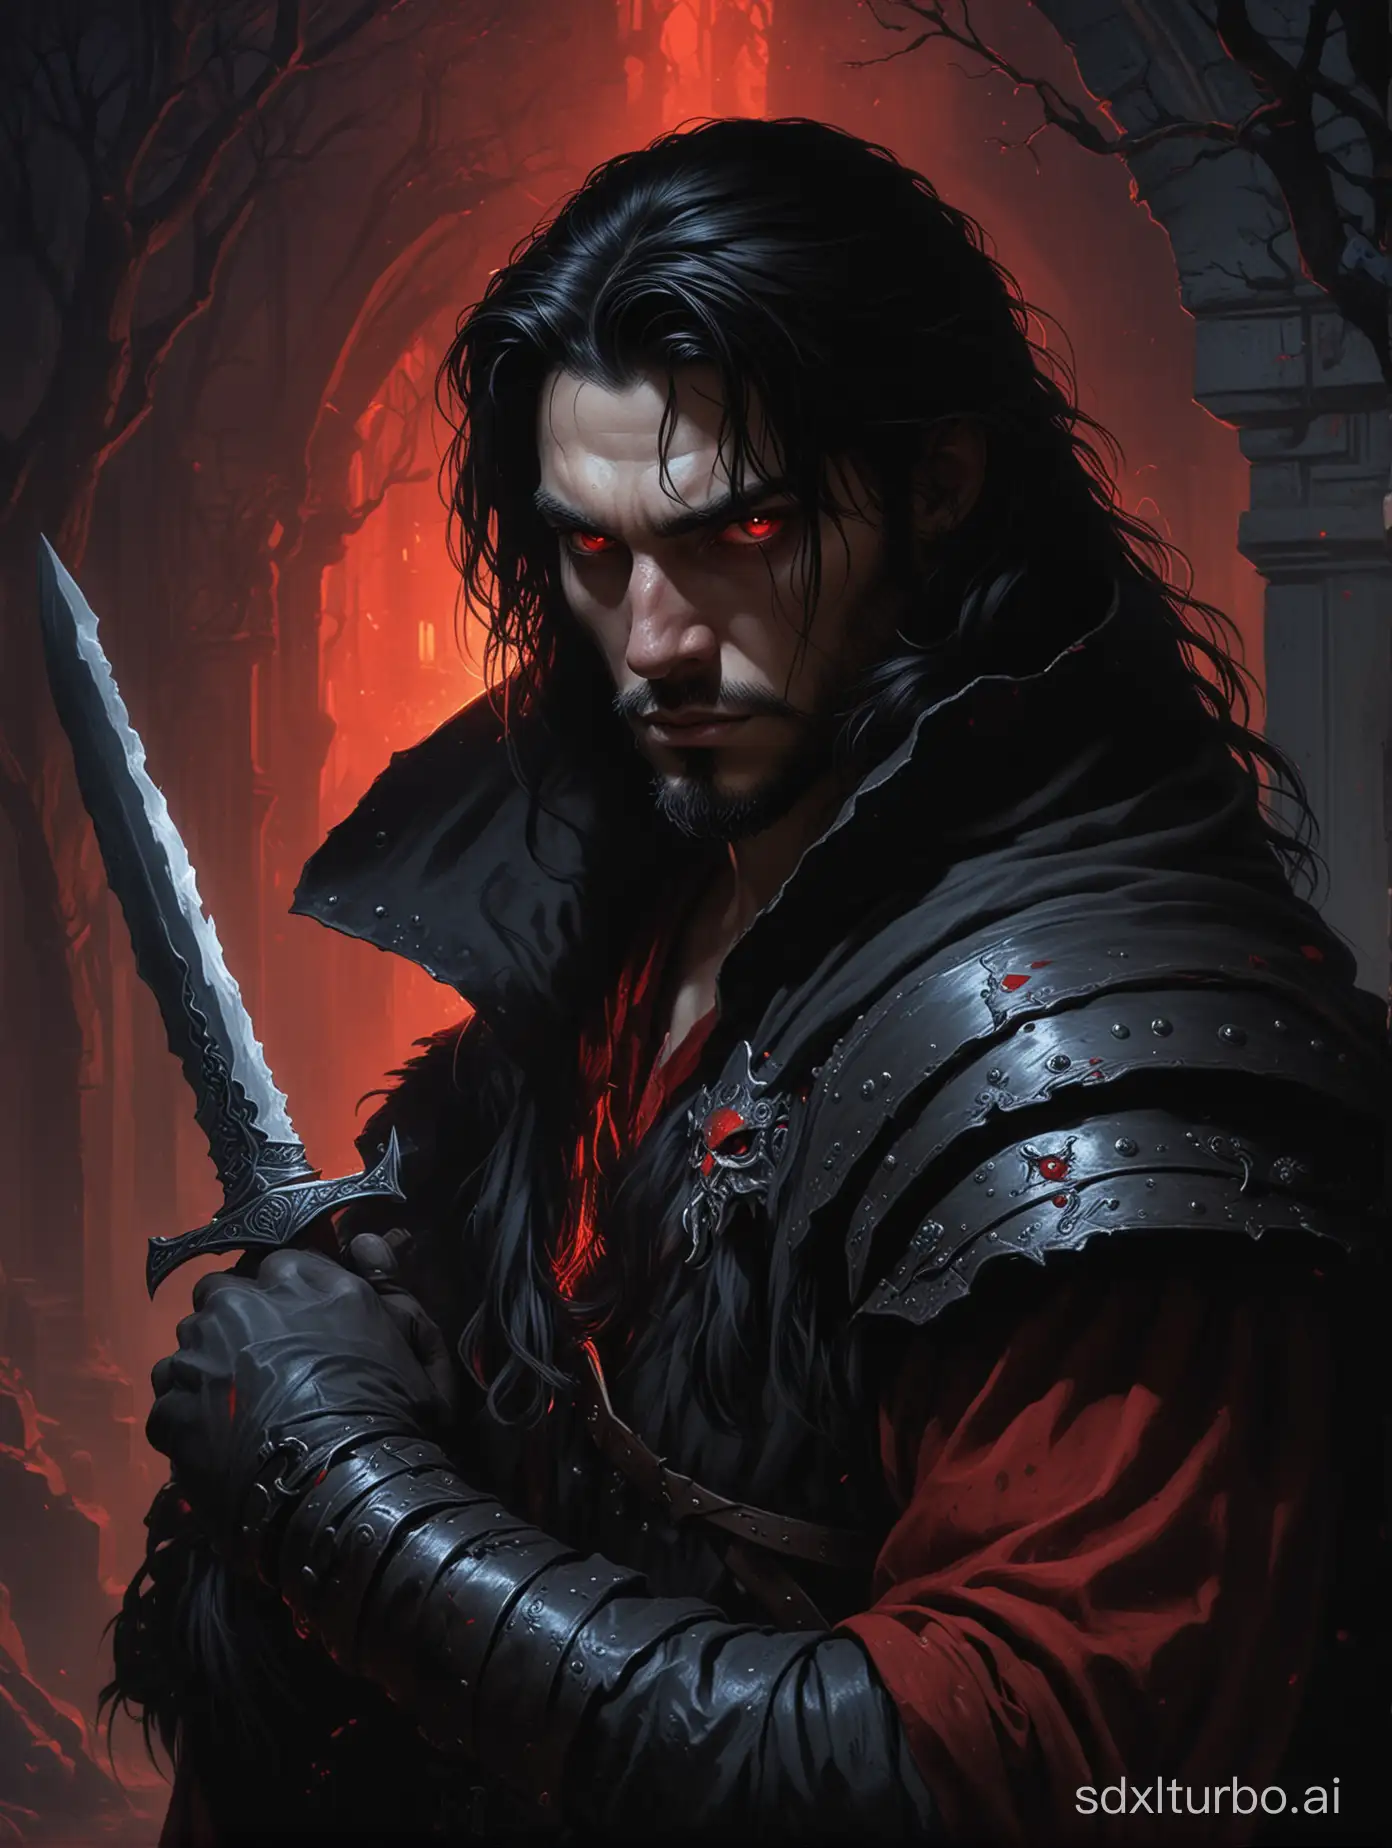 Medieval assasin with knife long black hair and a beardless, handsome face stands in a dark shadow background, his snow white skin illuminated by the red glow of his eyes. On his shoulder sits a one shadow imp creature with red eyes, The entire scene is captured in an oil painting, giving it a timeless and mysterious quality.